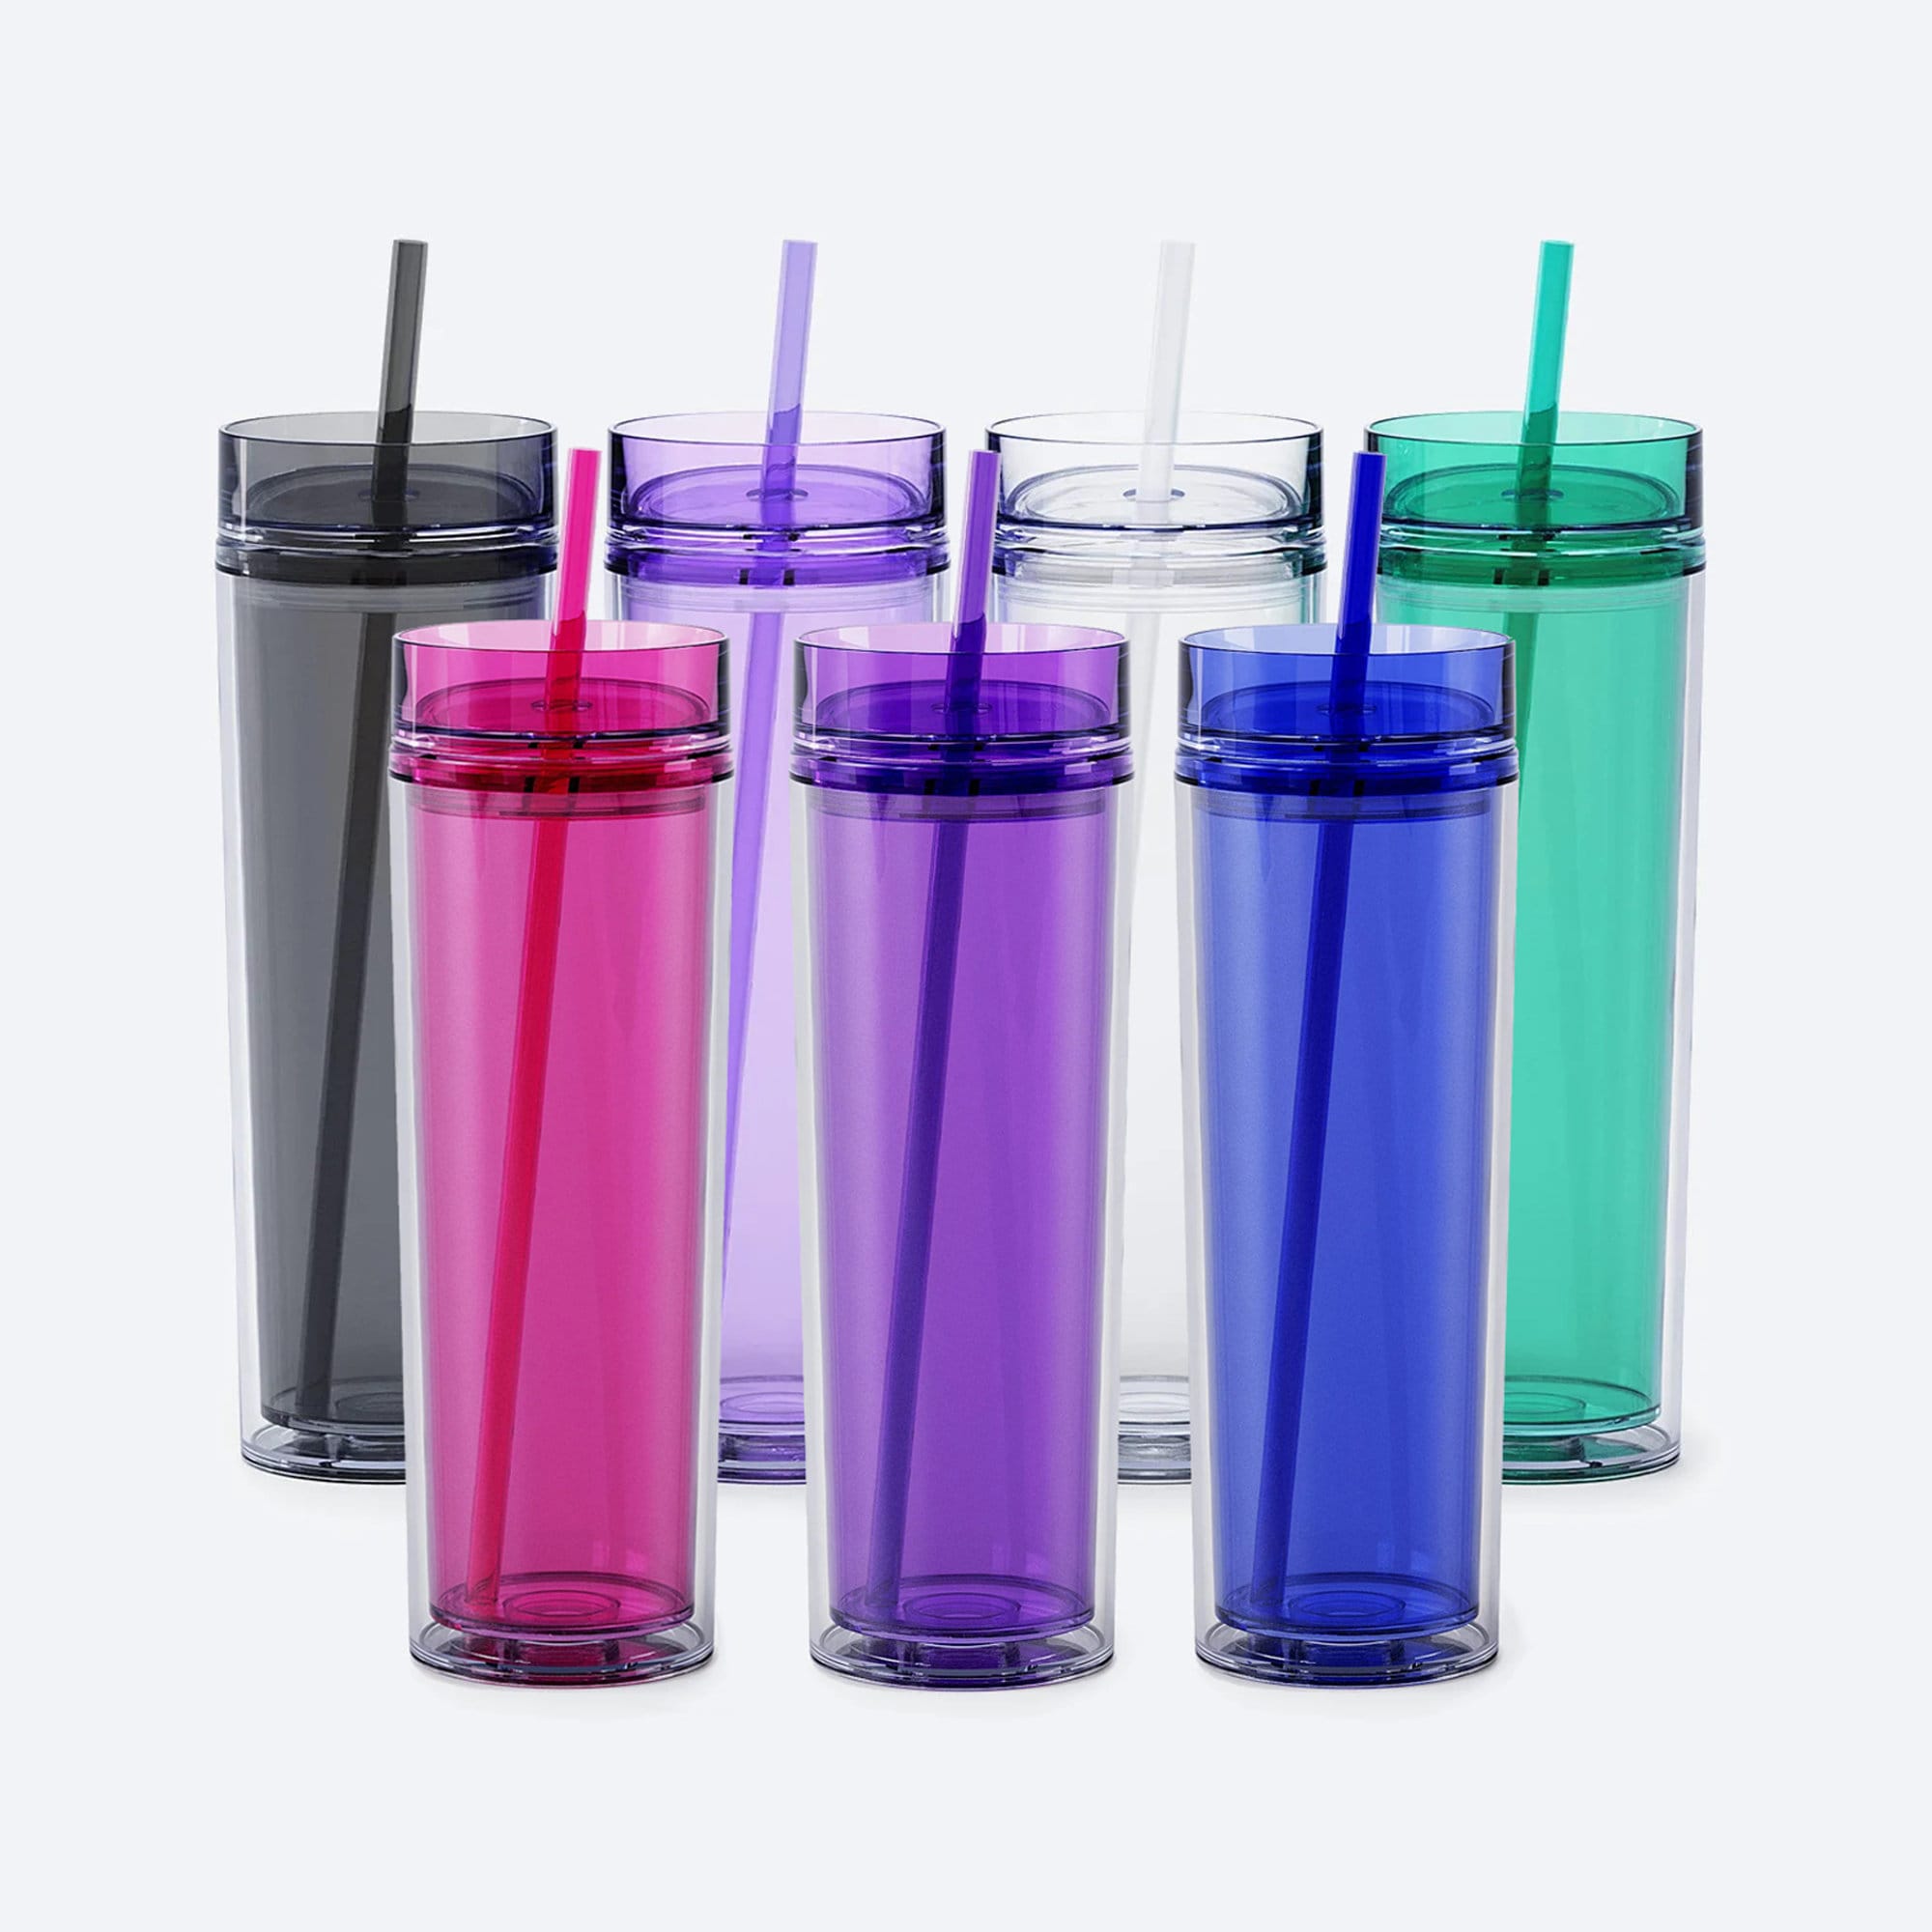 Cupture Stainless Steel Skinny Insulated Tumbler Cup with Lid  and Reusable Straw - 16 oz (Winter White): Tumblers & Water Glasses